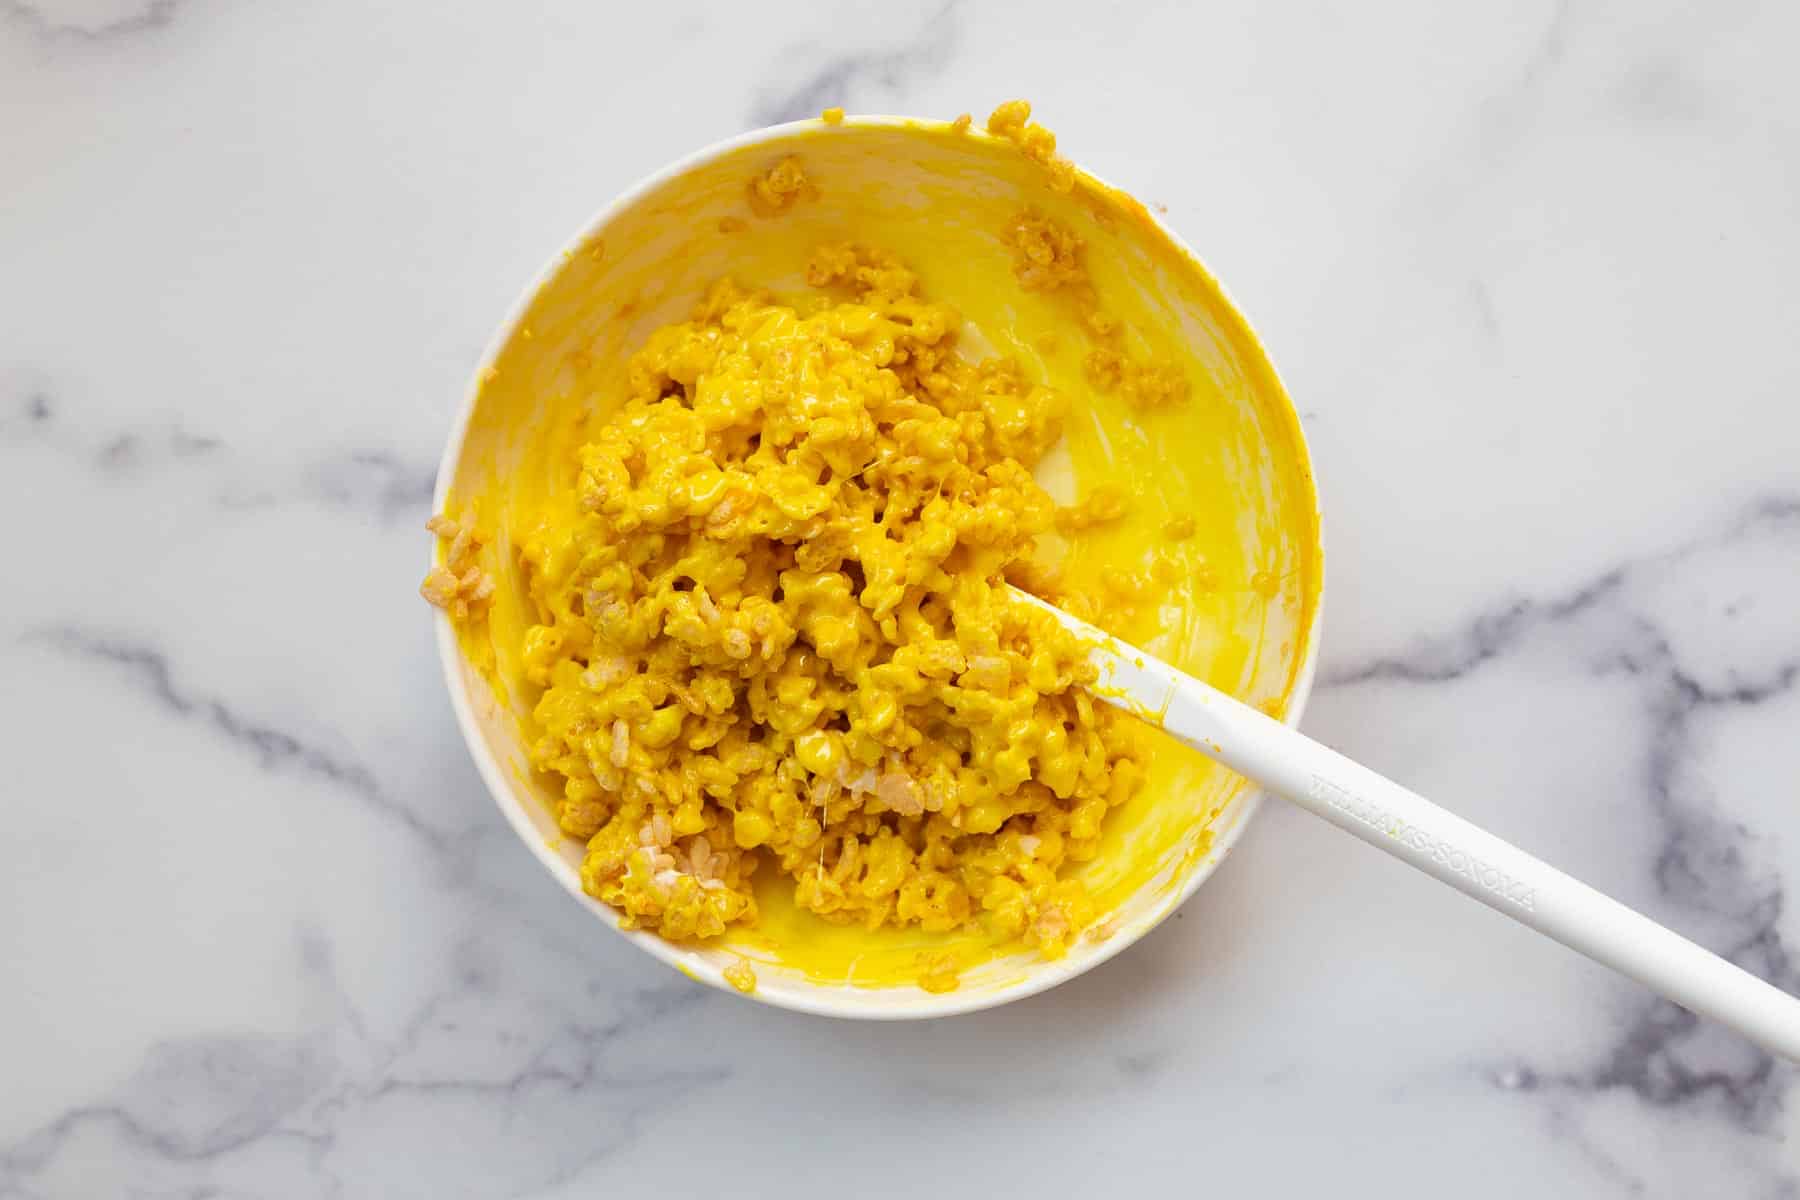 Bright yellow cereal dessert in white bowl with white spatula.